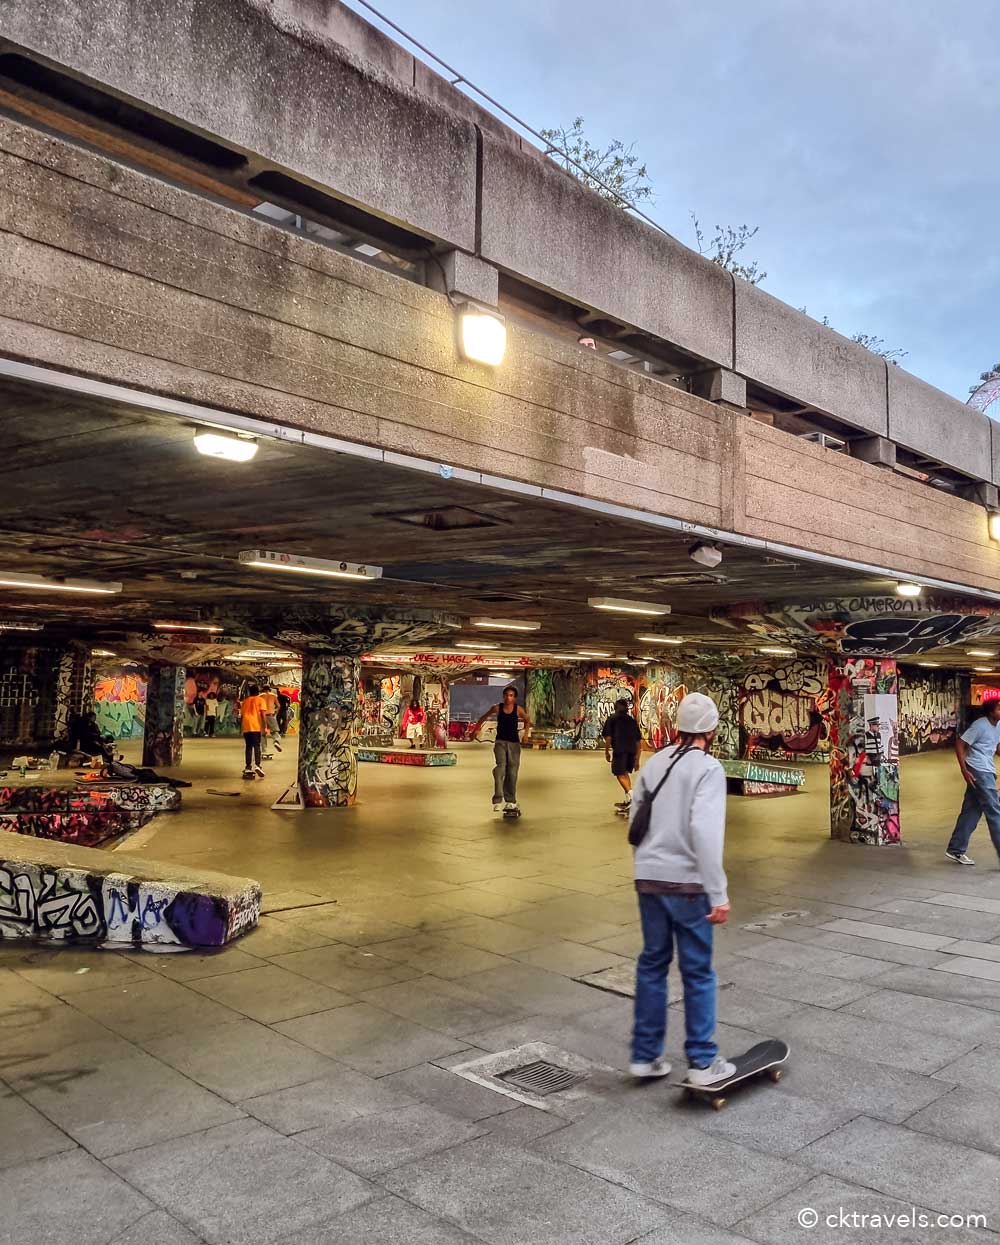 South Bank Skate Space